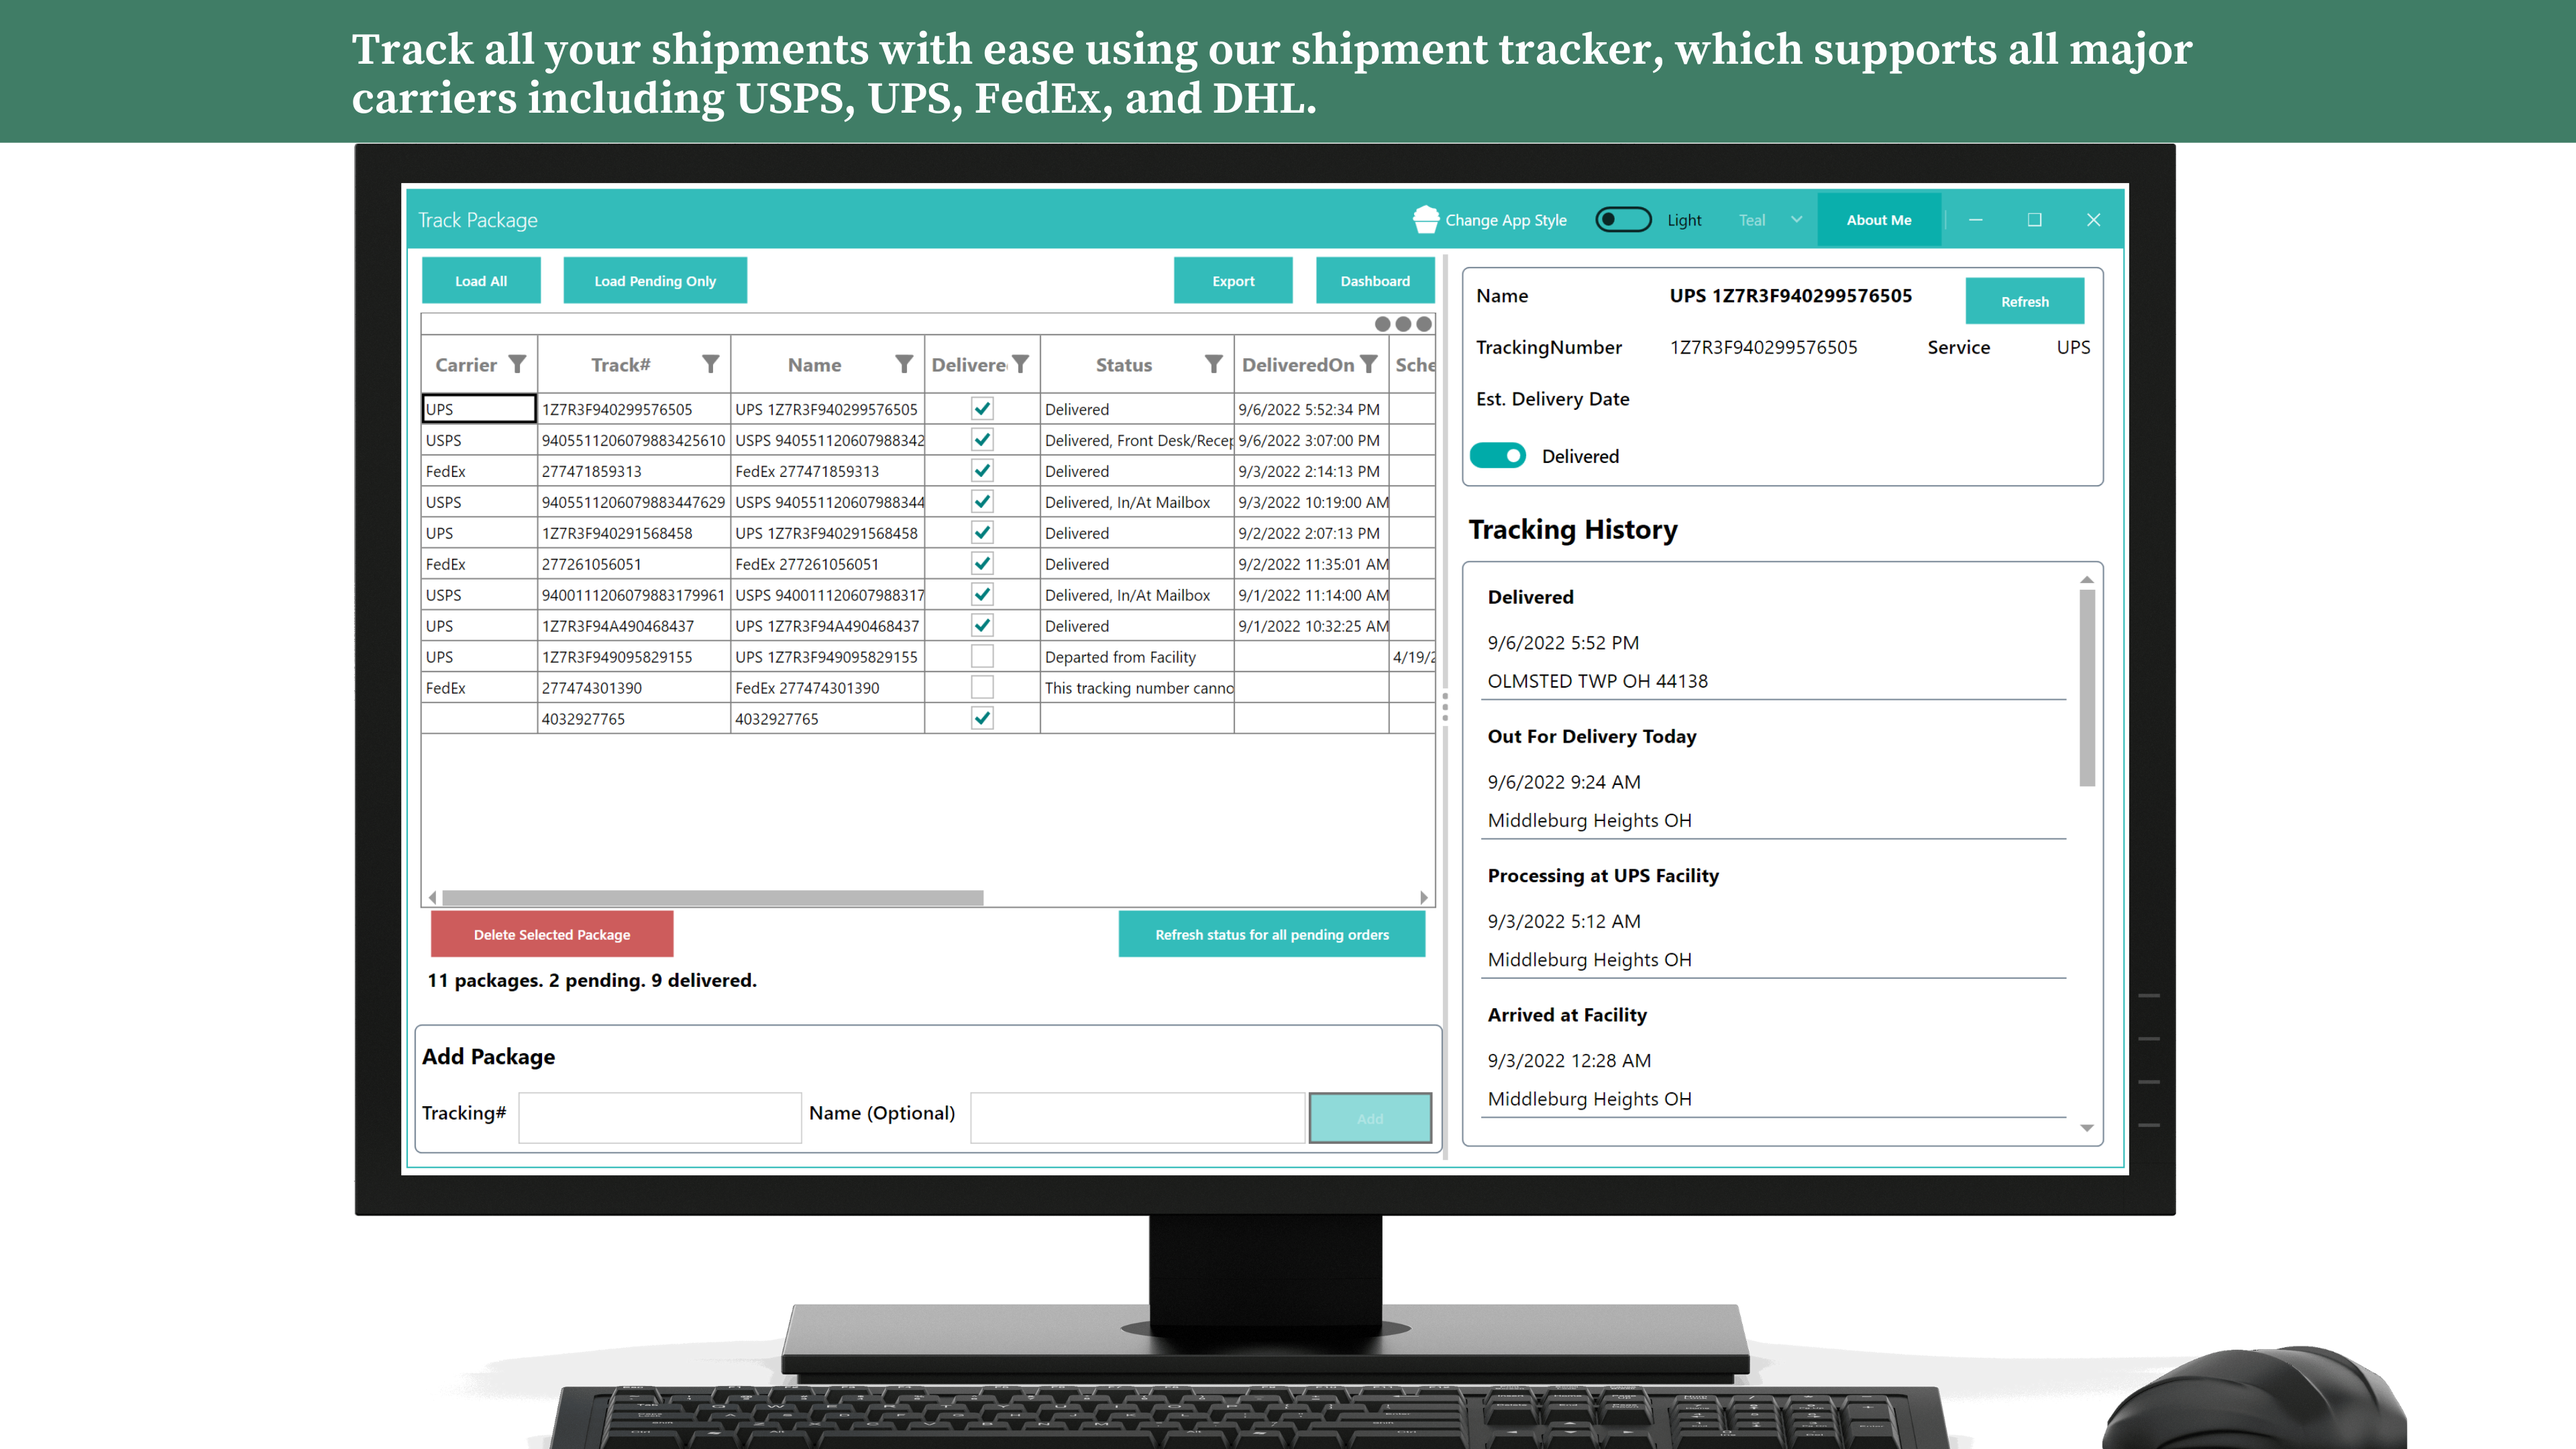 Track all shipments in one place